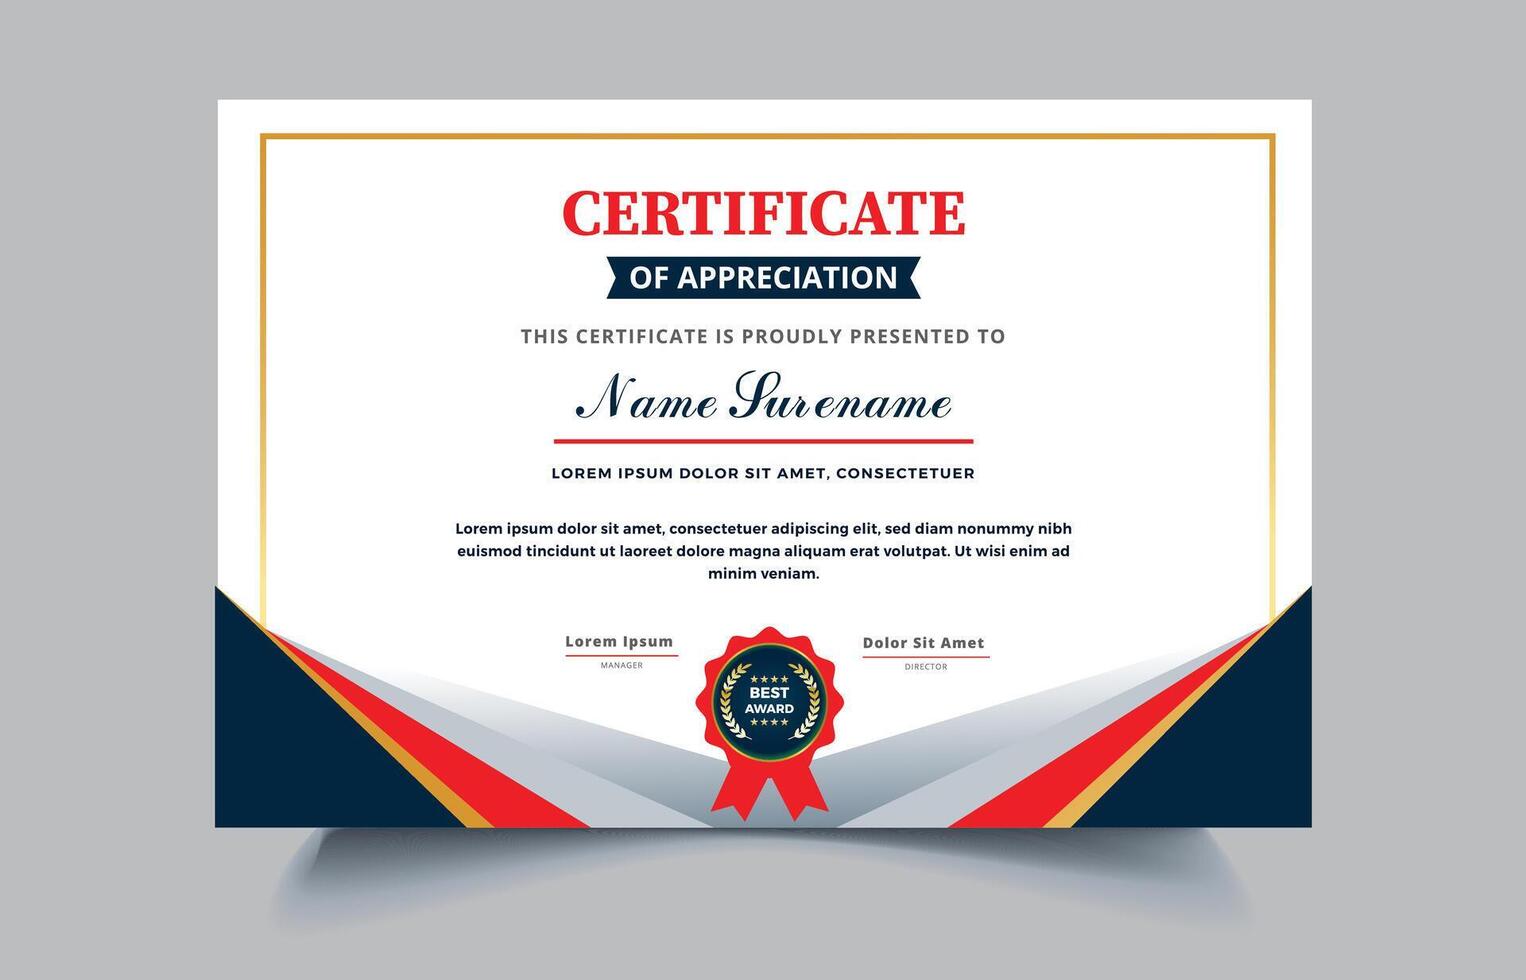 Certificate of Appreciation template, certificate of achievement, awards diploma template pro style EPS10 vector